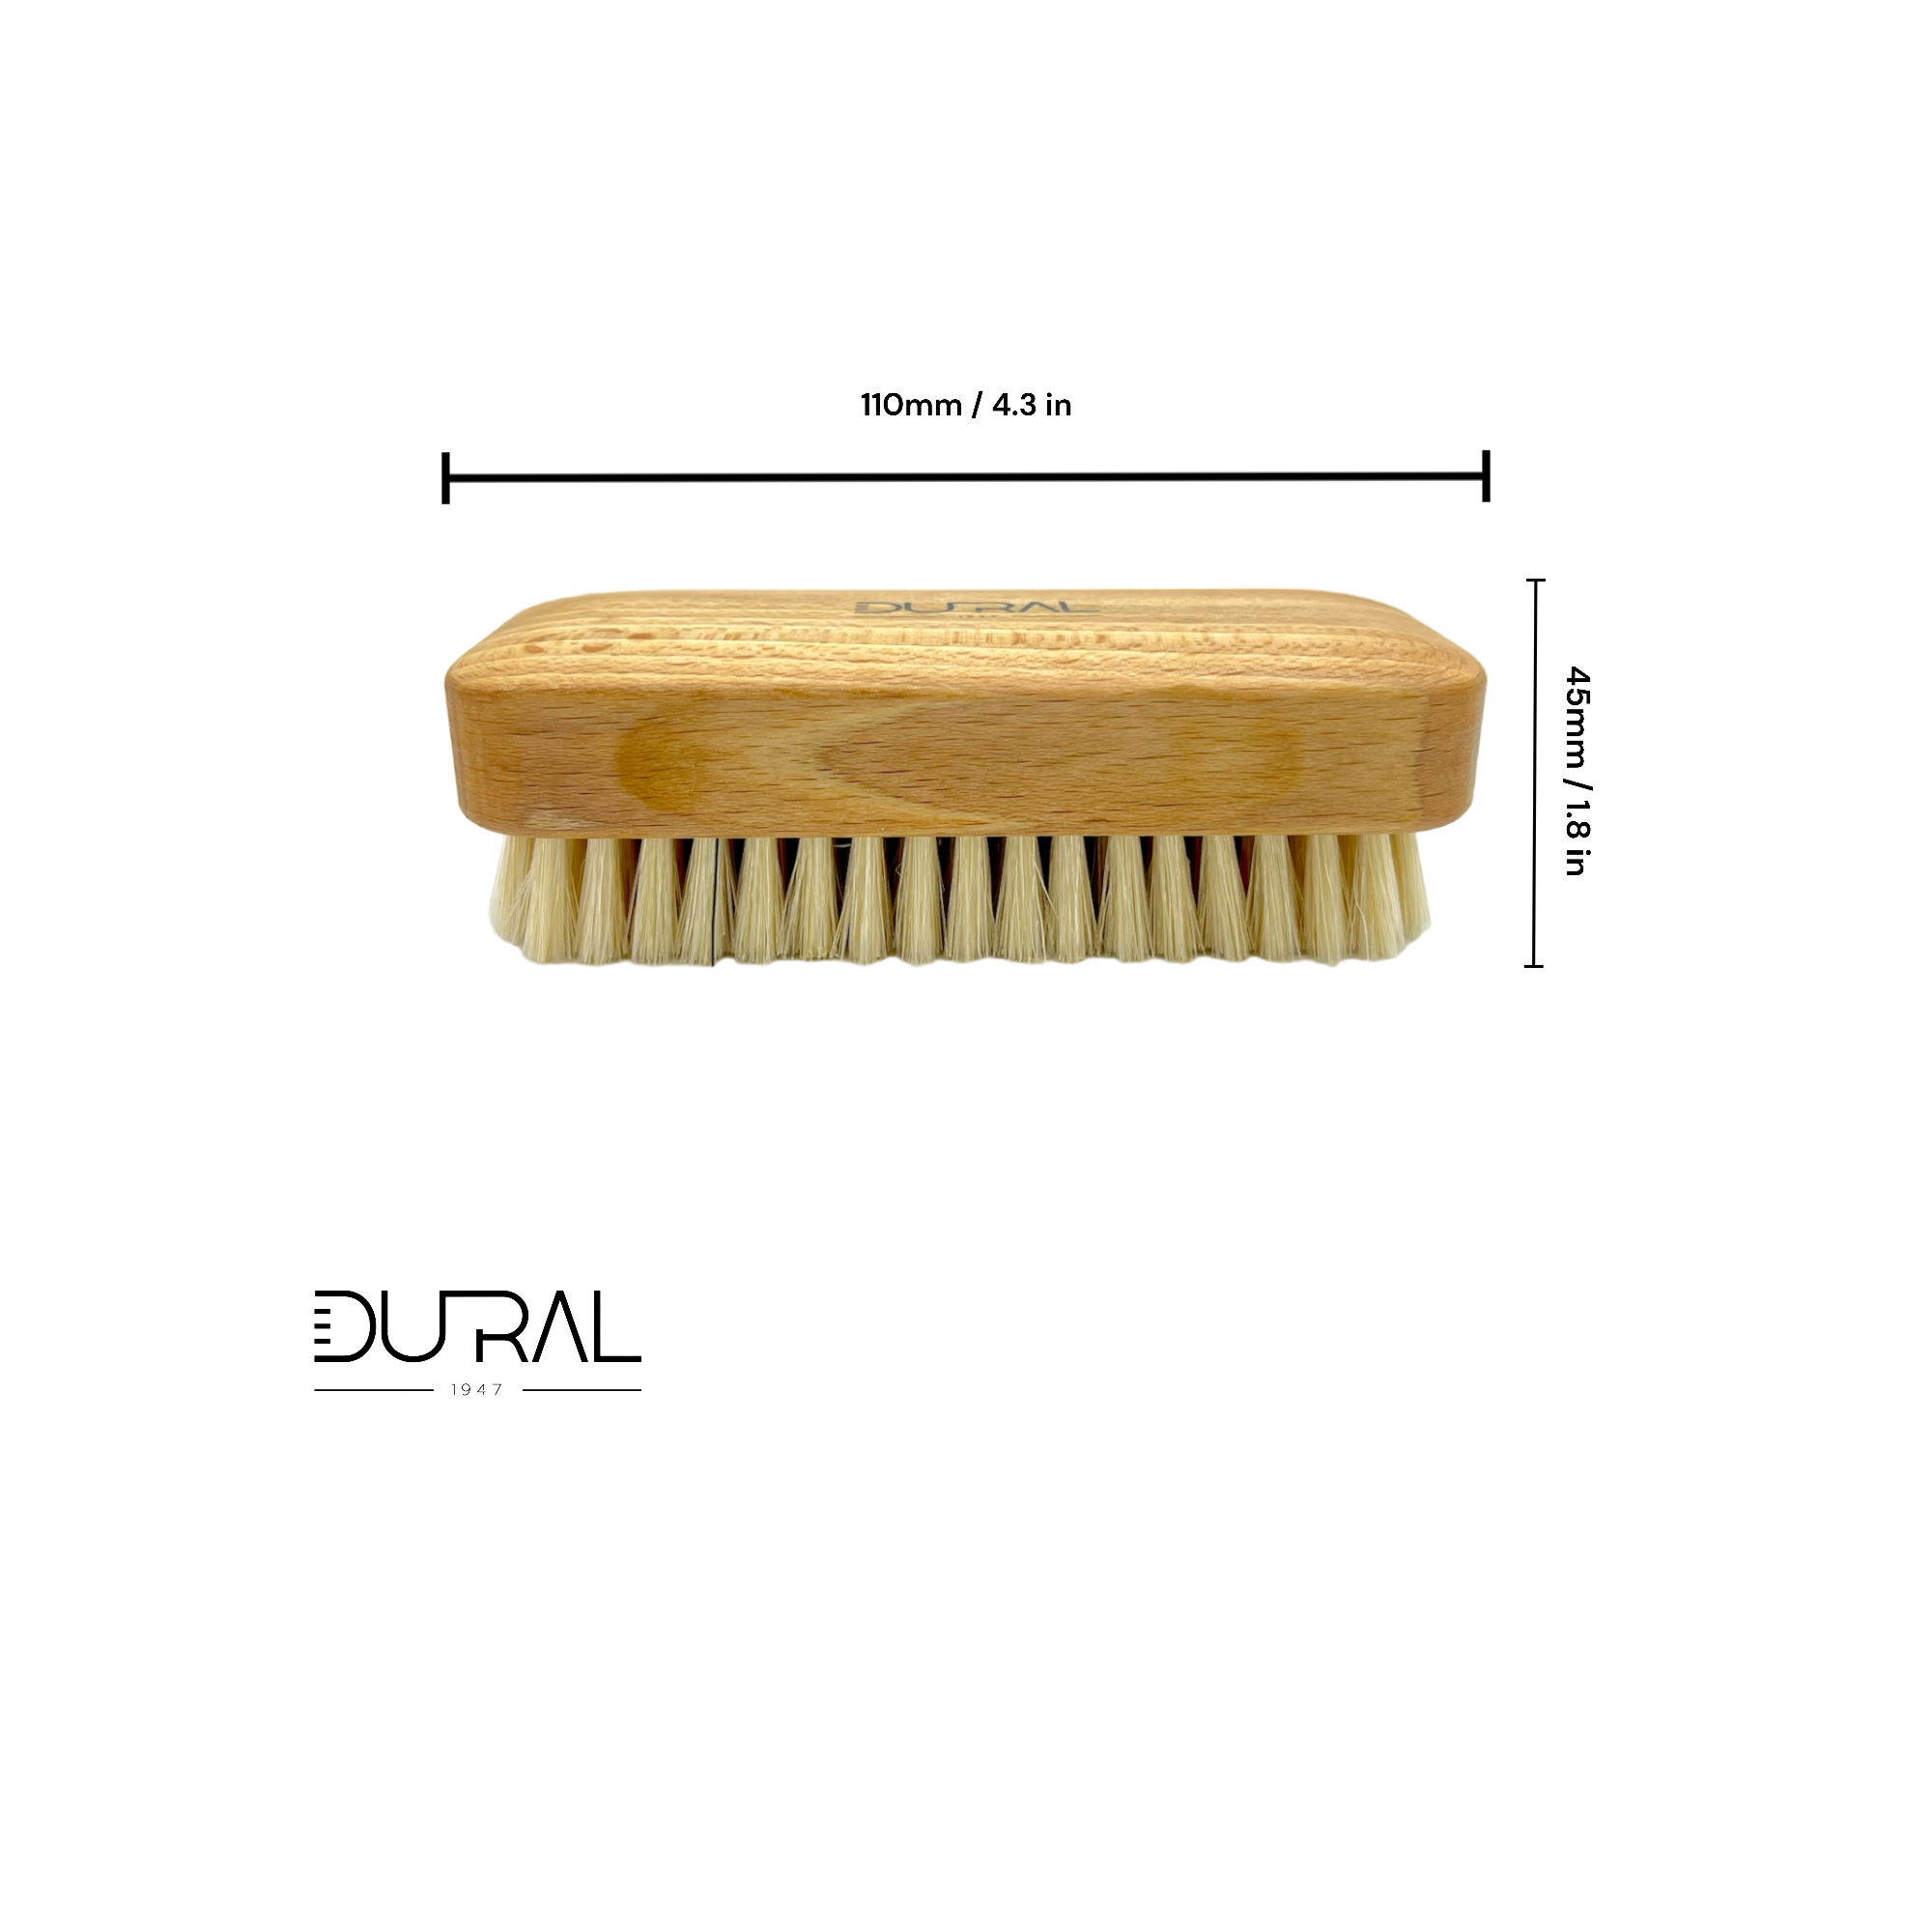 Dural Beech wood craftsman hand brush with pure natural bristles